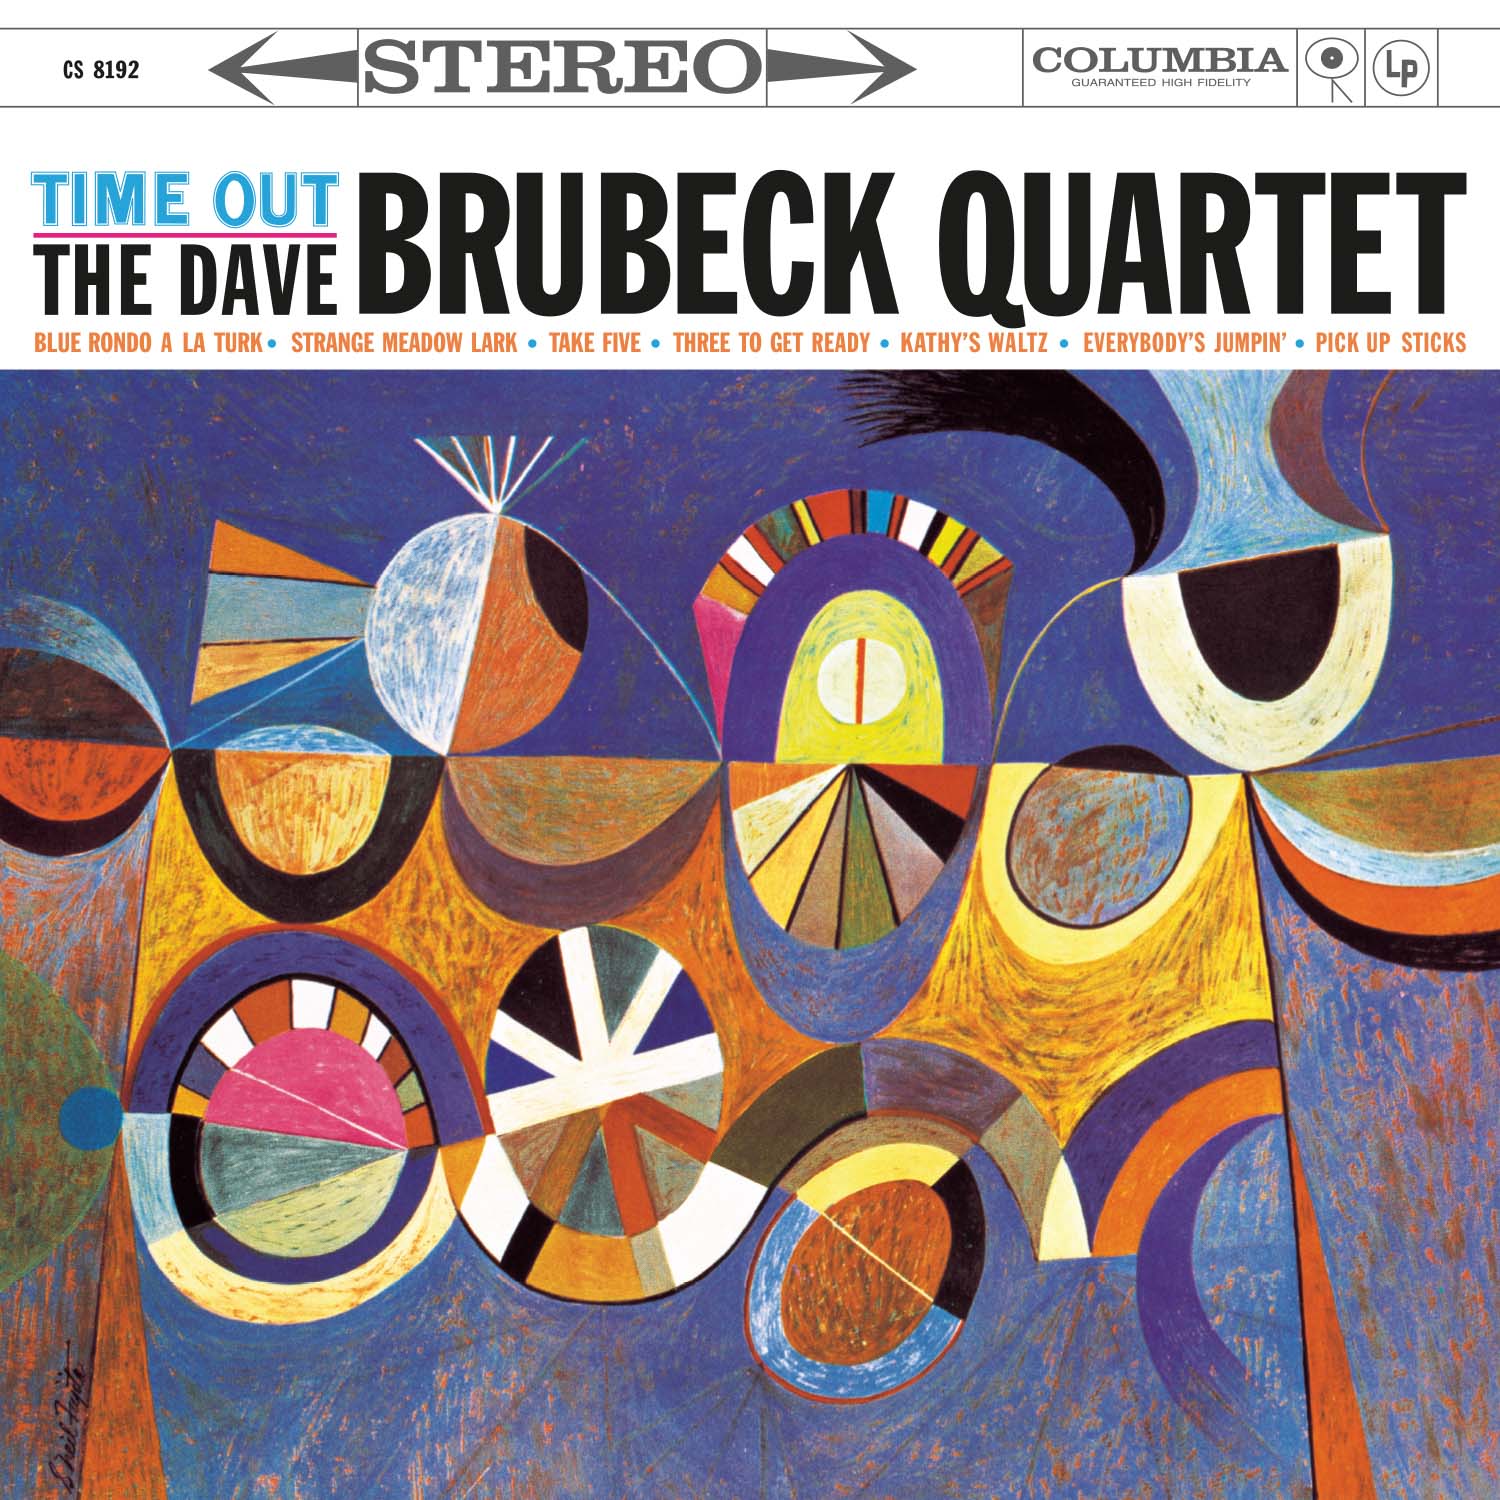 AAPJ 8192 45 Brubeck Time Out